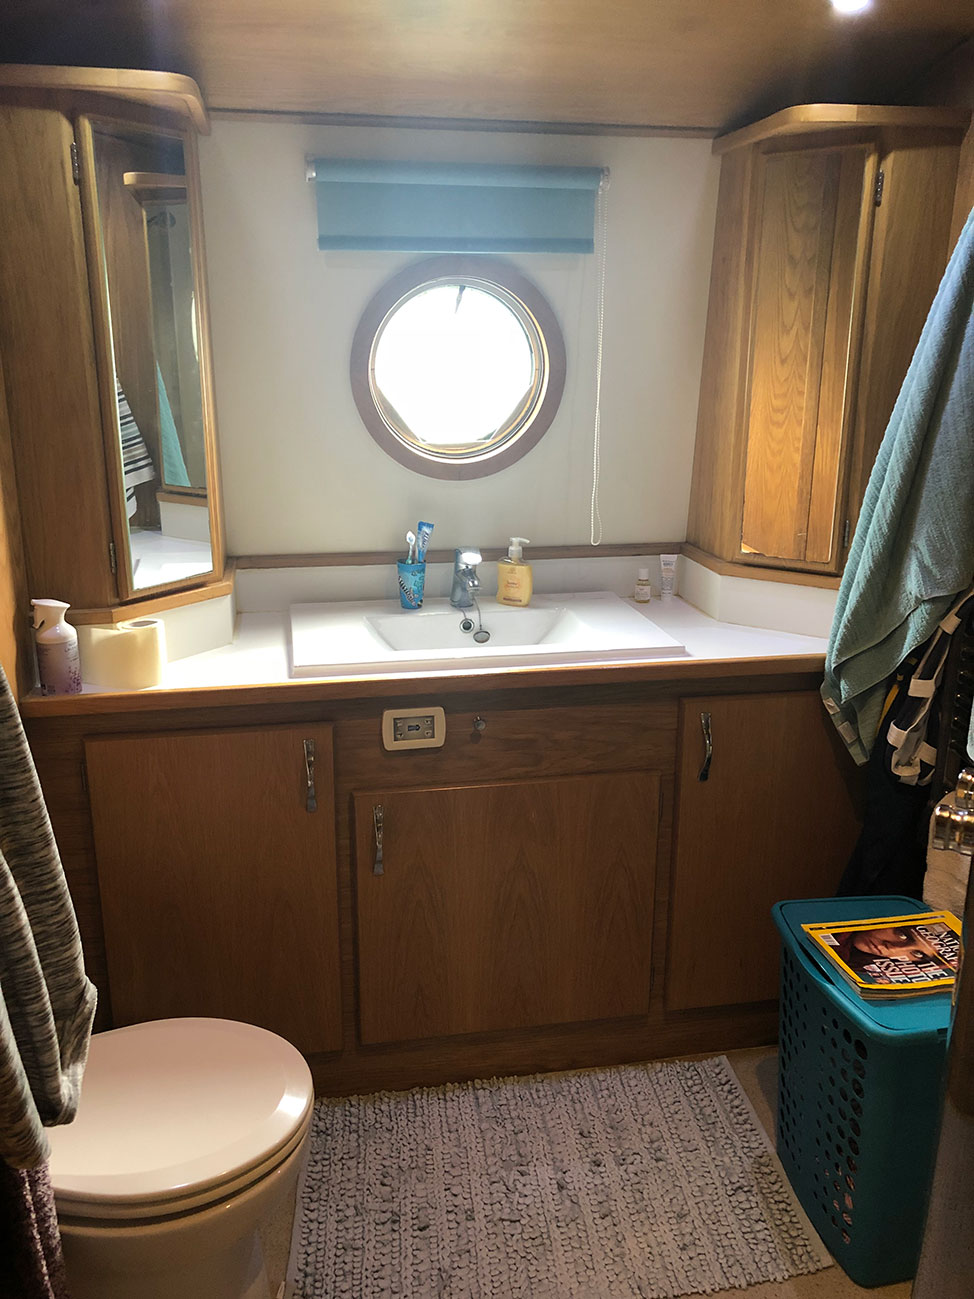 View of the houseboat bathroom facilities